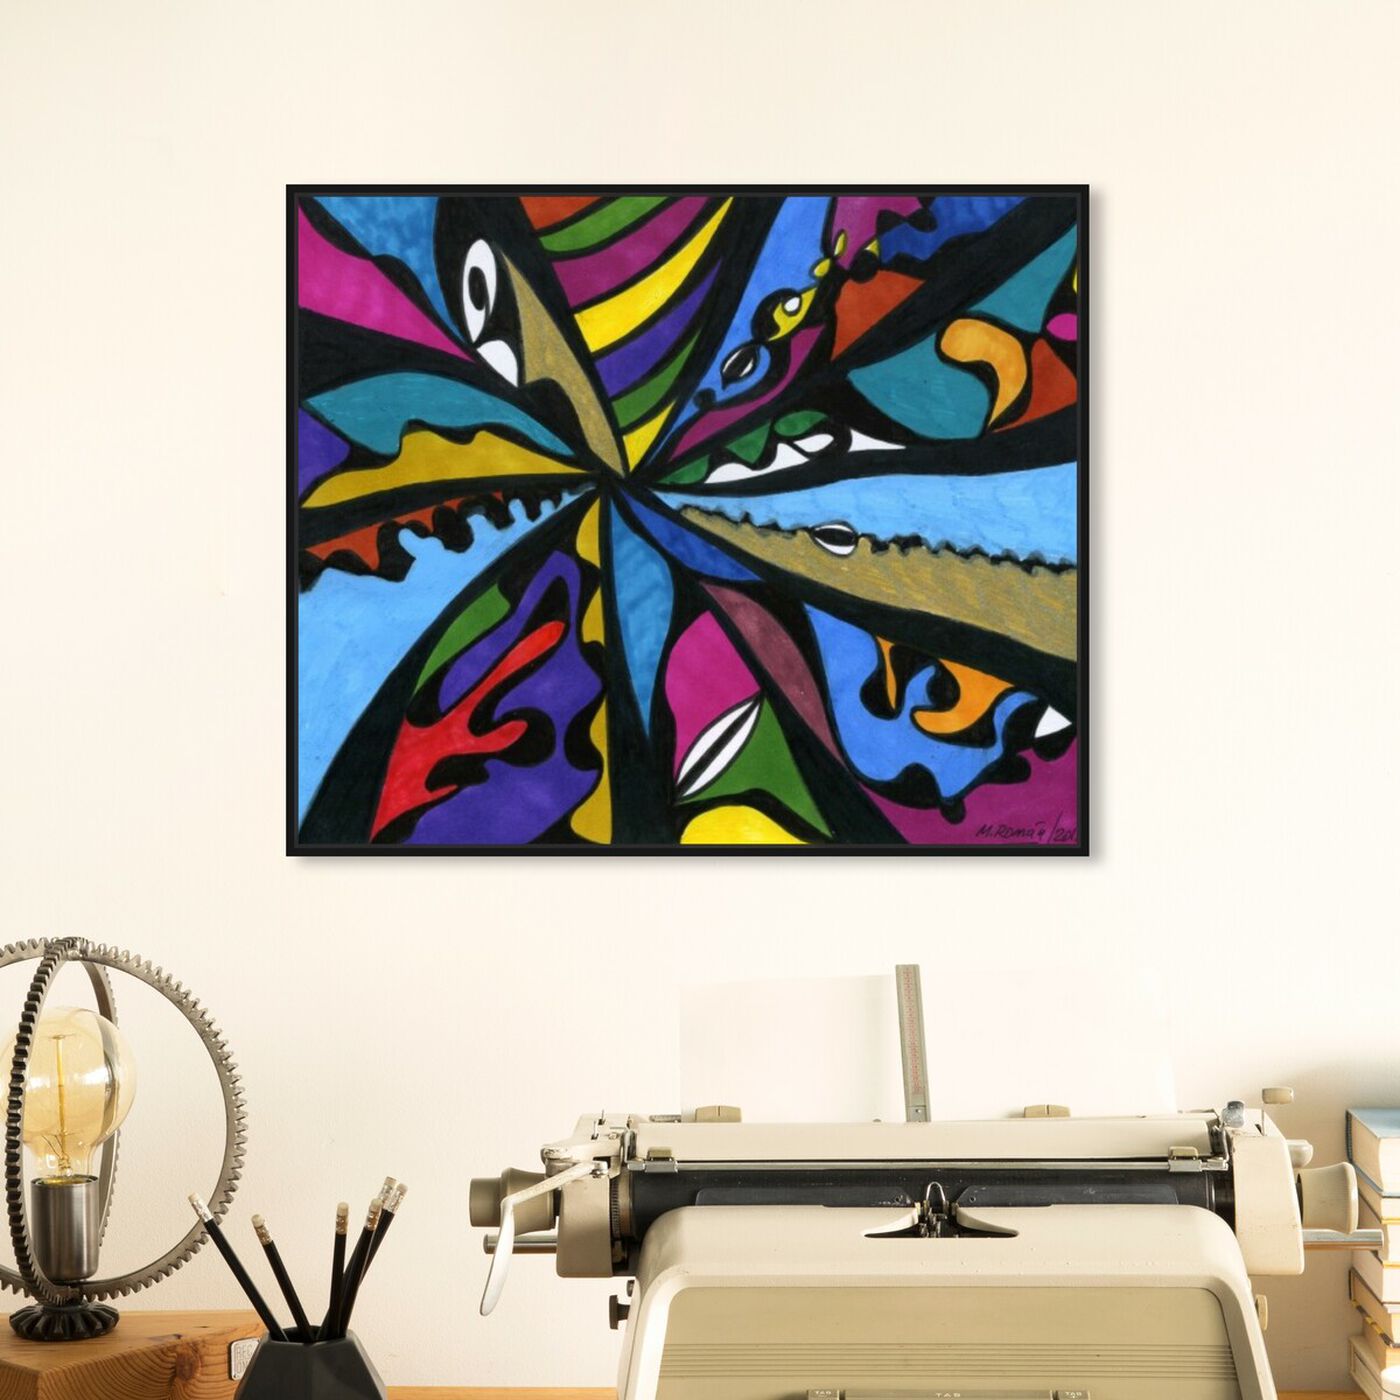 Hanging view of Requiem featuring abstract and geometric art.